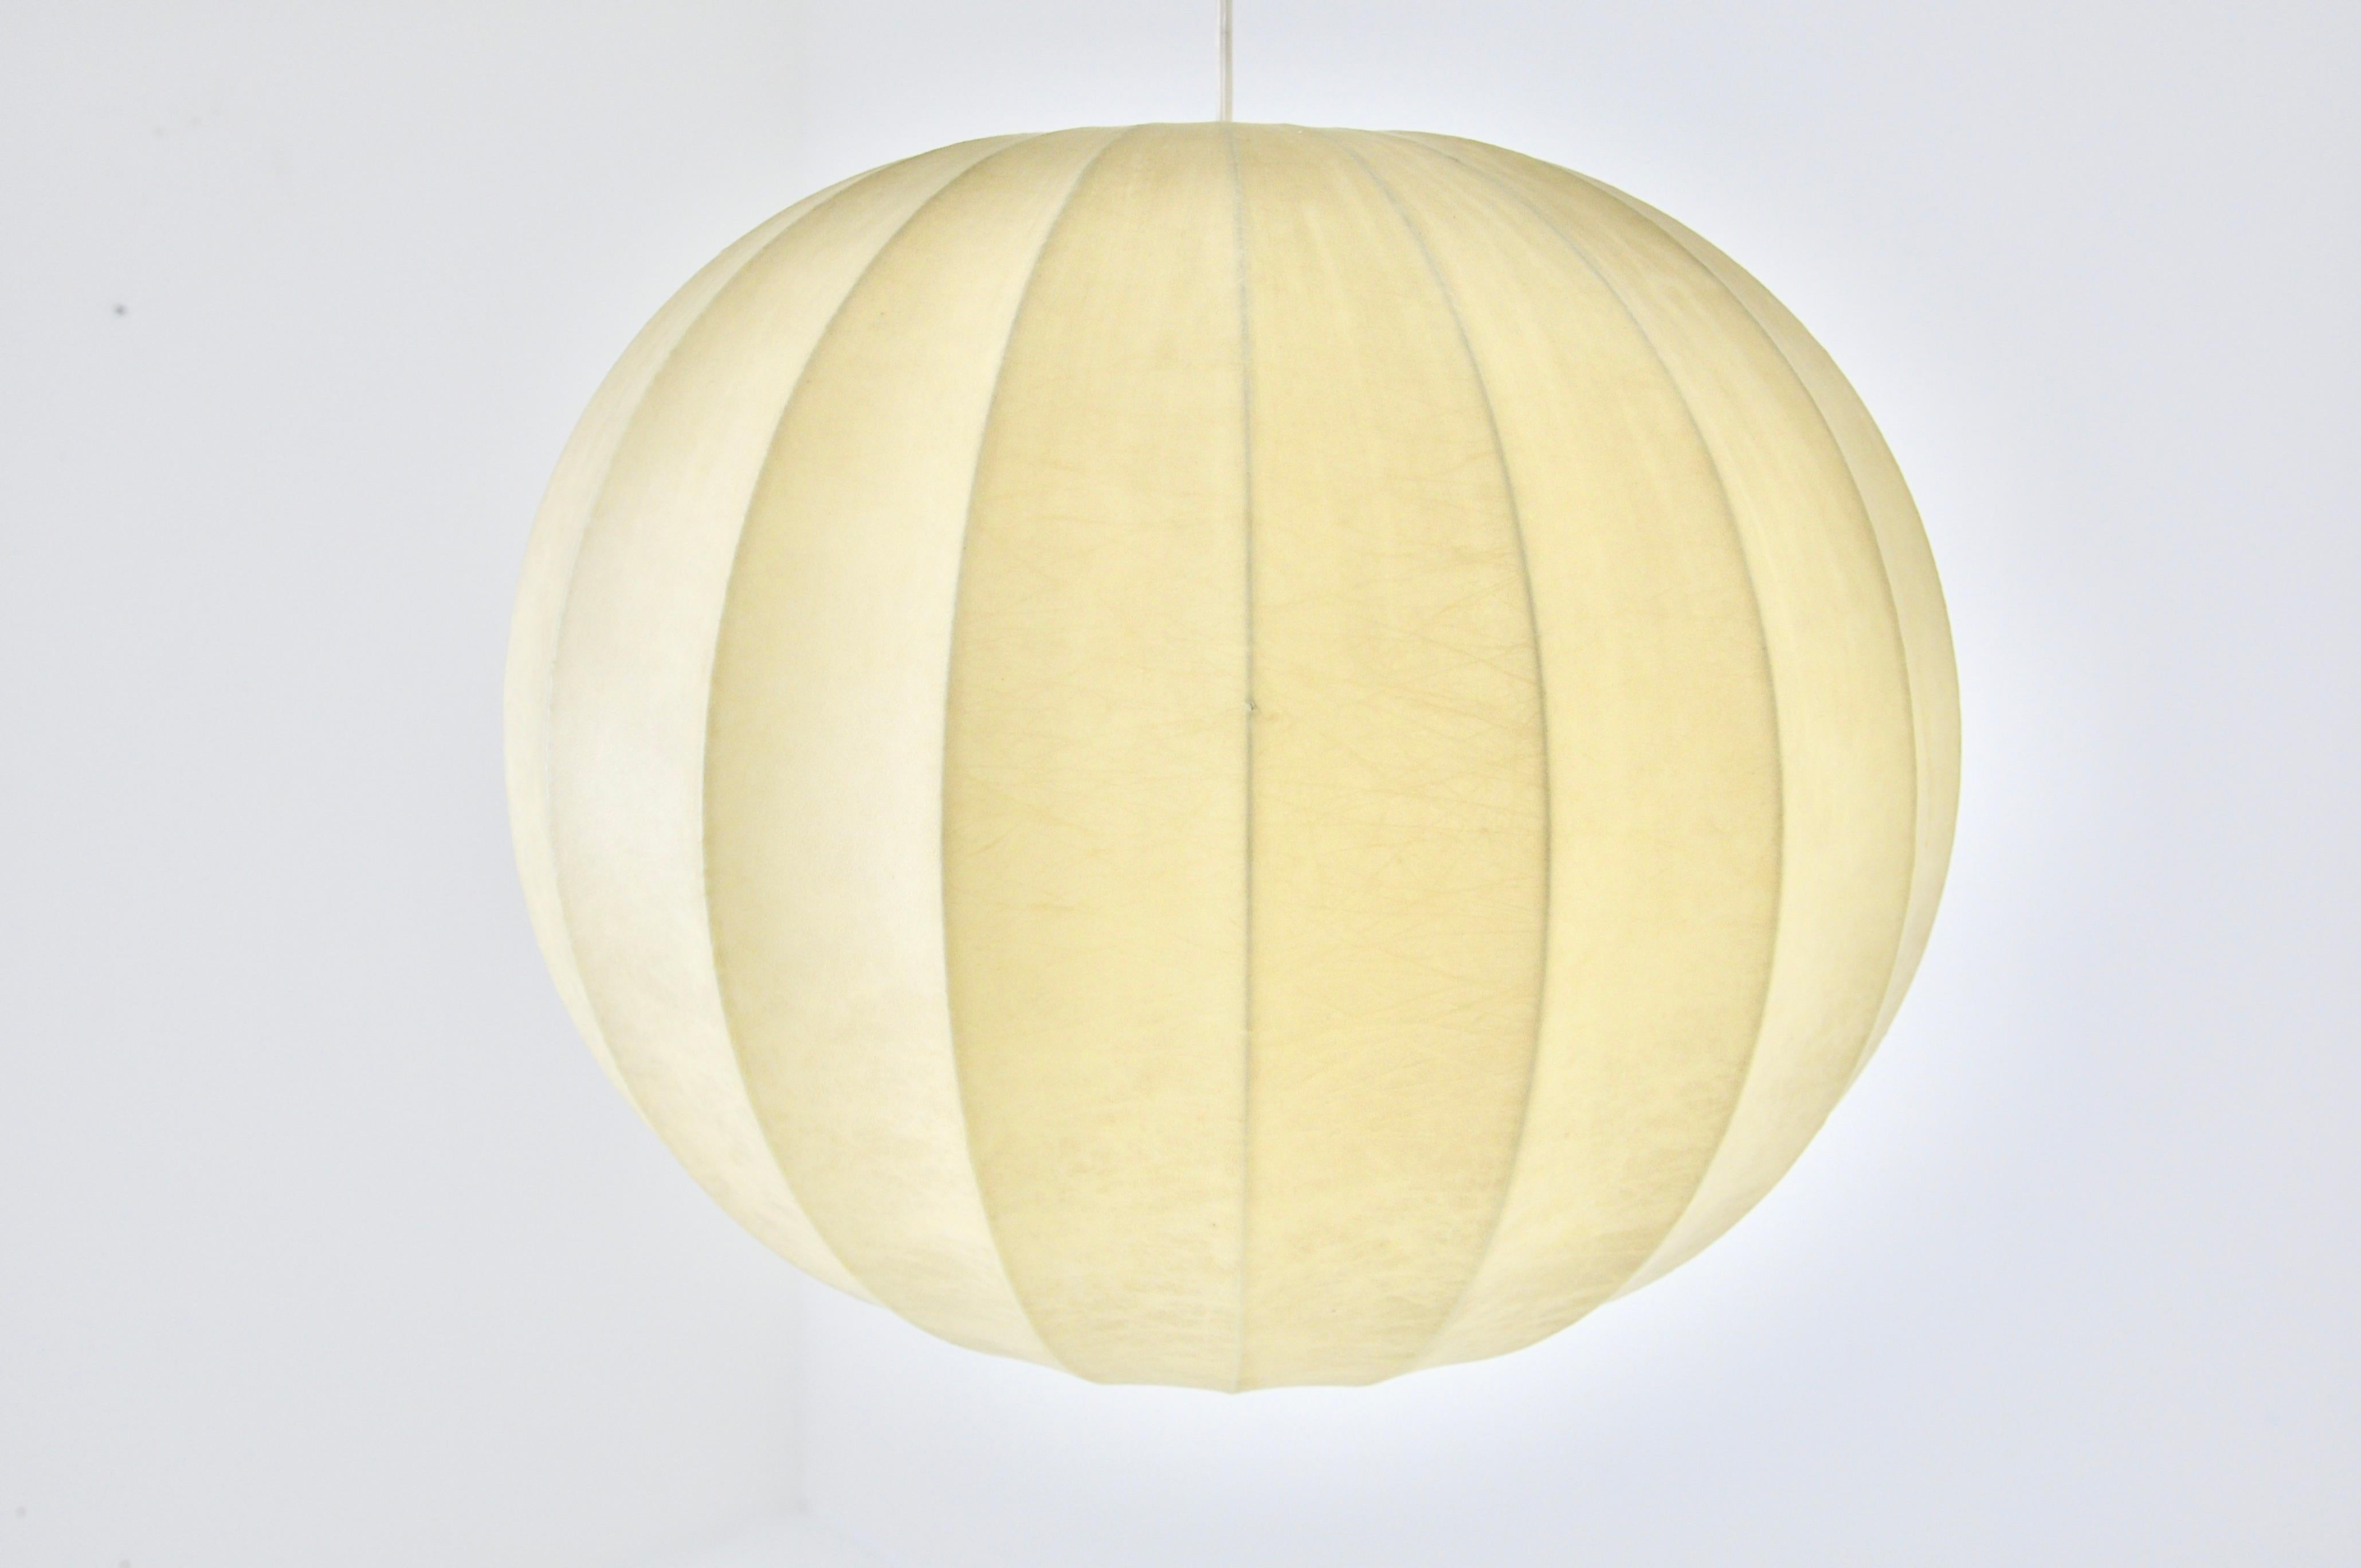 Mid-20th Century Cocoon Hanging Lamp by Achille & Pier Giacomo Castiglioni for Flos, 1960s For Sale